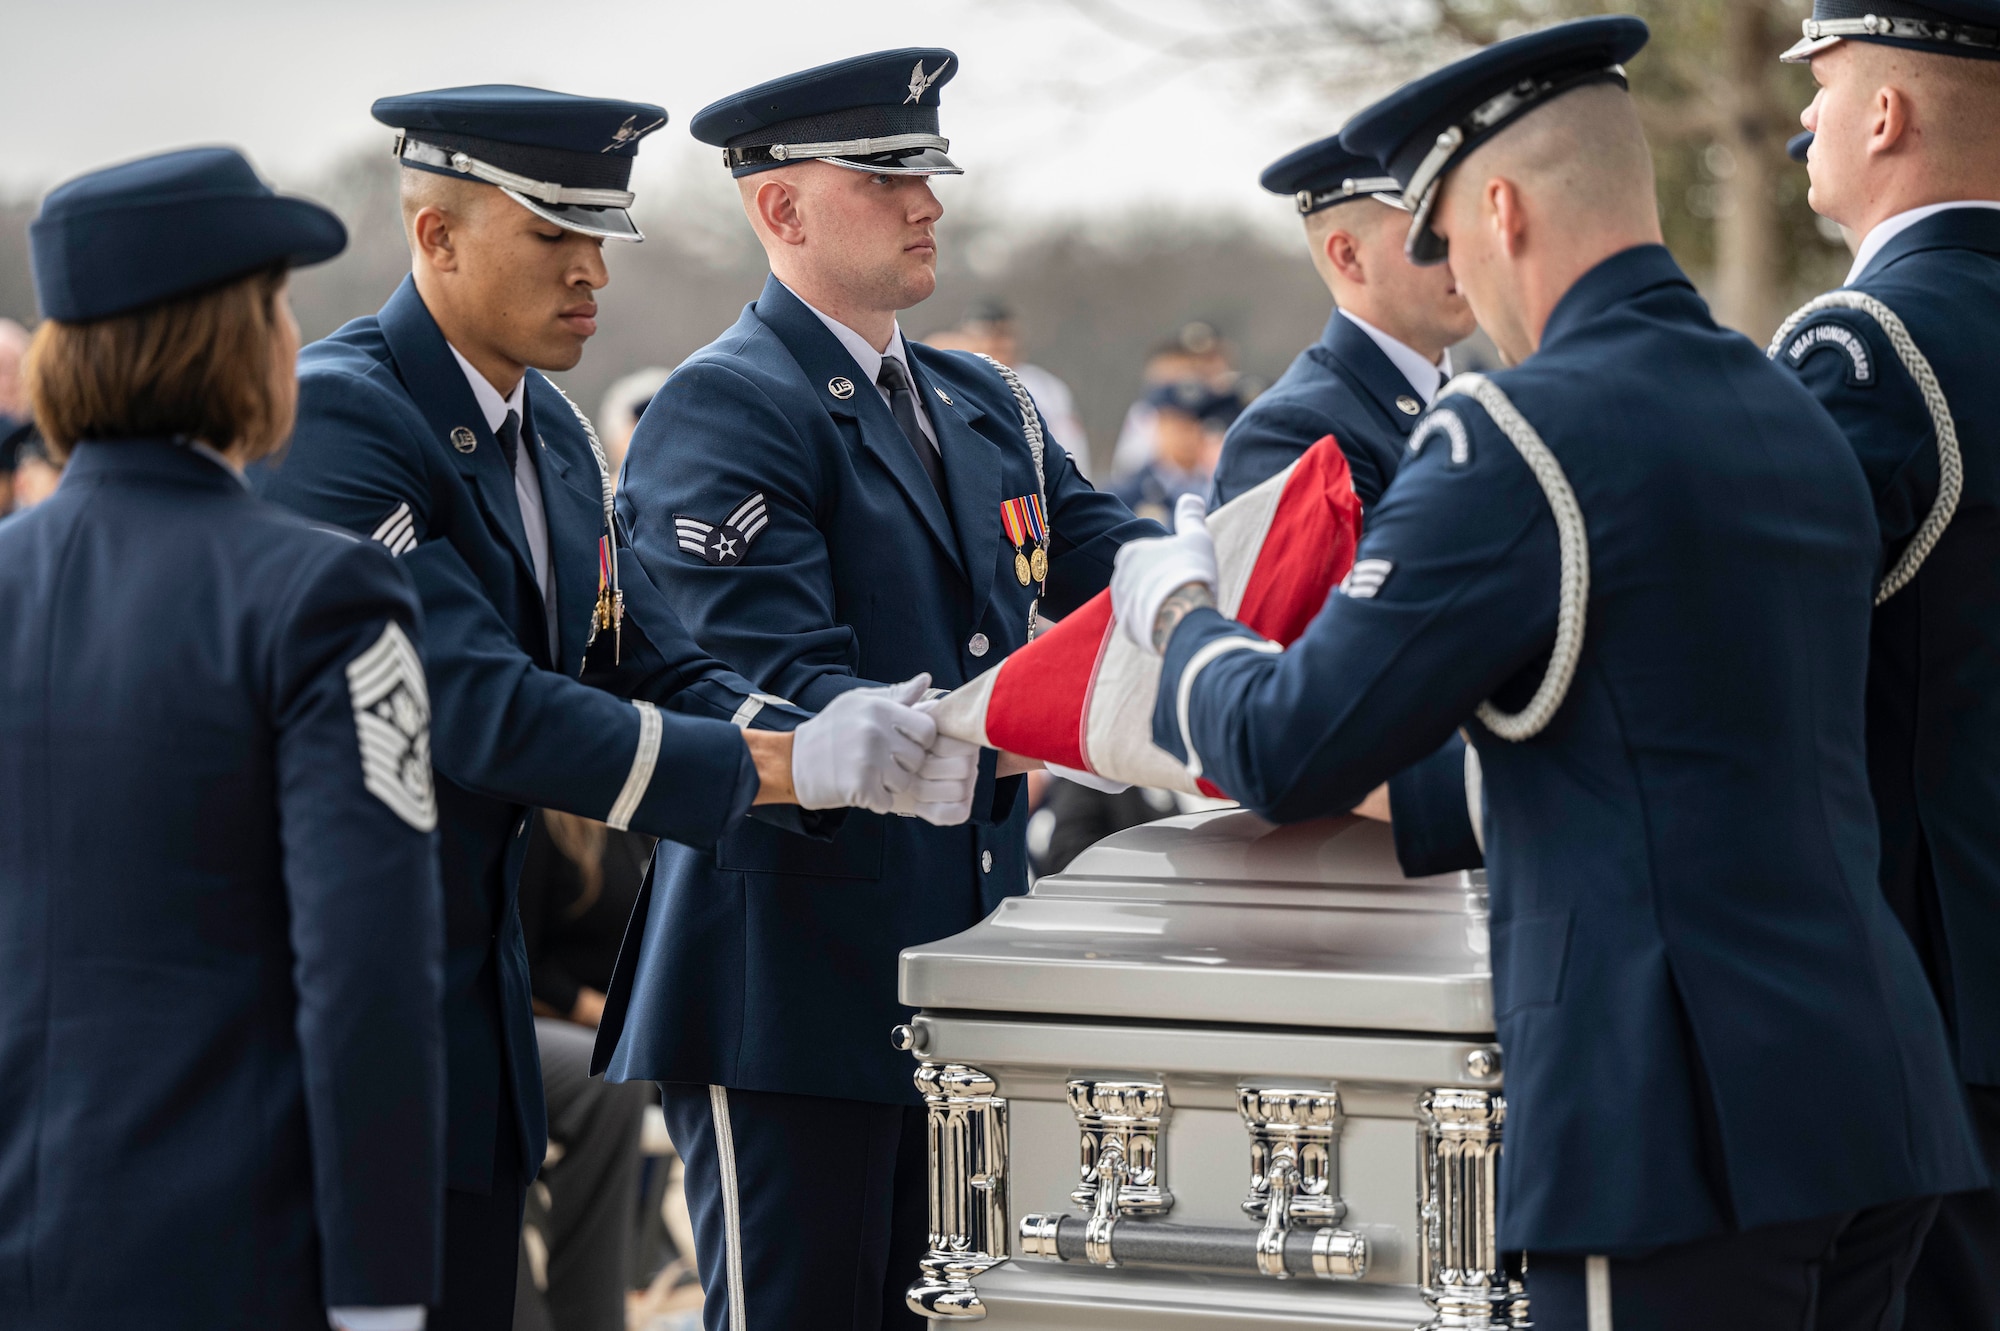 Members of the U.S. Air Force Honor Guard fold the U.S. flag during the interment with full military honors of the fifth Chief Master Sgt. of the Air Force Robert D. Gaylor, Feb. 10, 2024 at Fort Sam Houston National Cemetery, Texas. Gaylor championed Air Force professional military education in the late 1960s and 1970s before he was promoted to Chief Master Sgt. of the Air Force in 1977. He continued to educate and inspire service members for more than 40 years after his retirement from military service. (U.S. Air Force photo by Tristin English).